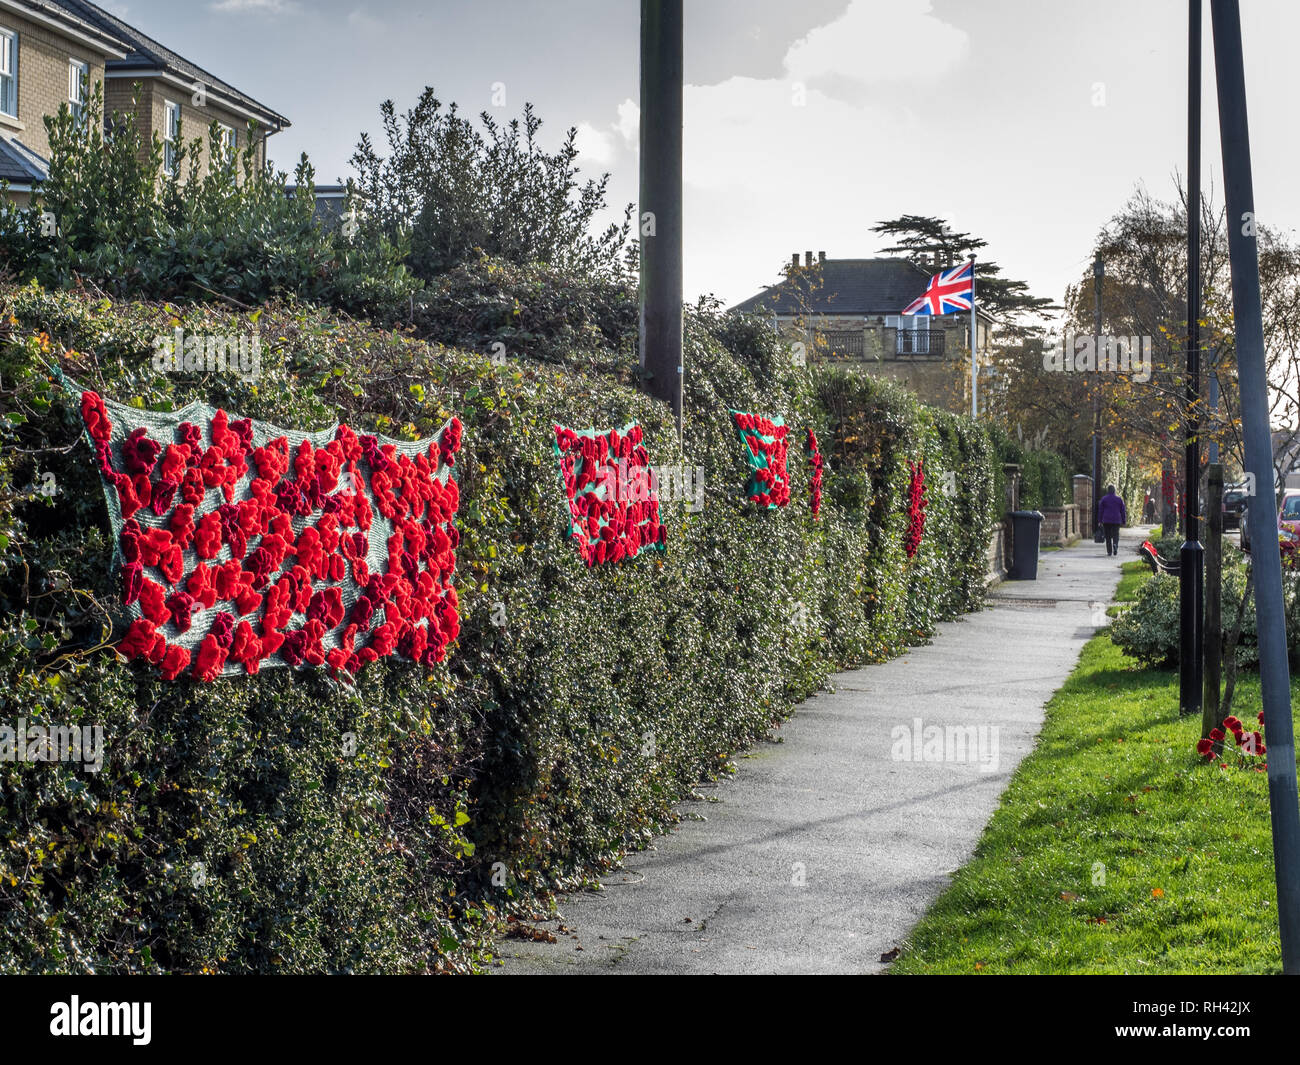 a village remembers Remembrance with yarn bombing red crochet poppy poppies hanging on trees and bushes shrubs throughout the town Stock Photo